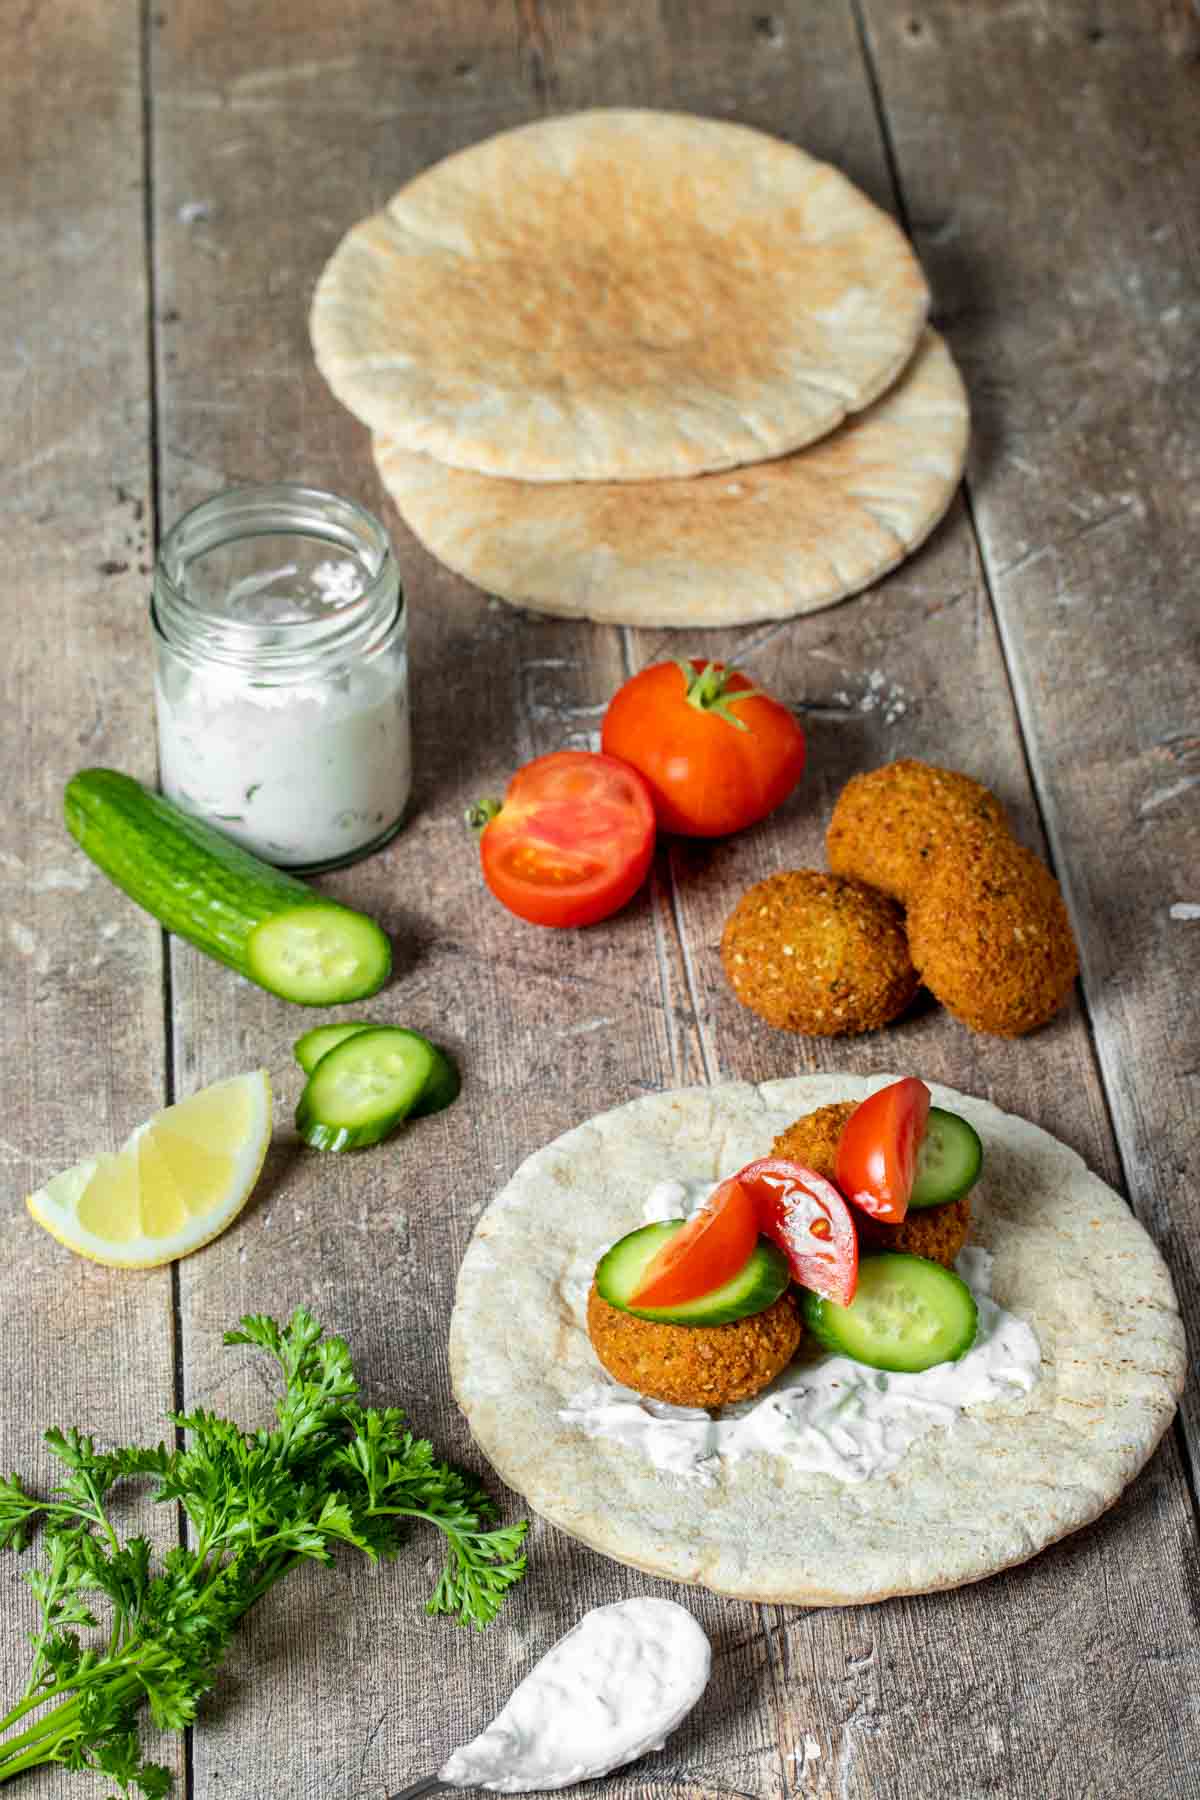 A pita bread with sauce, falafel, cucumbers and tomatoes on it surrounded by more of the imgredients.